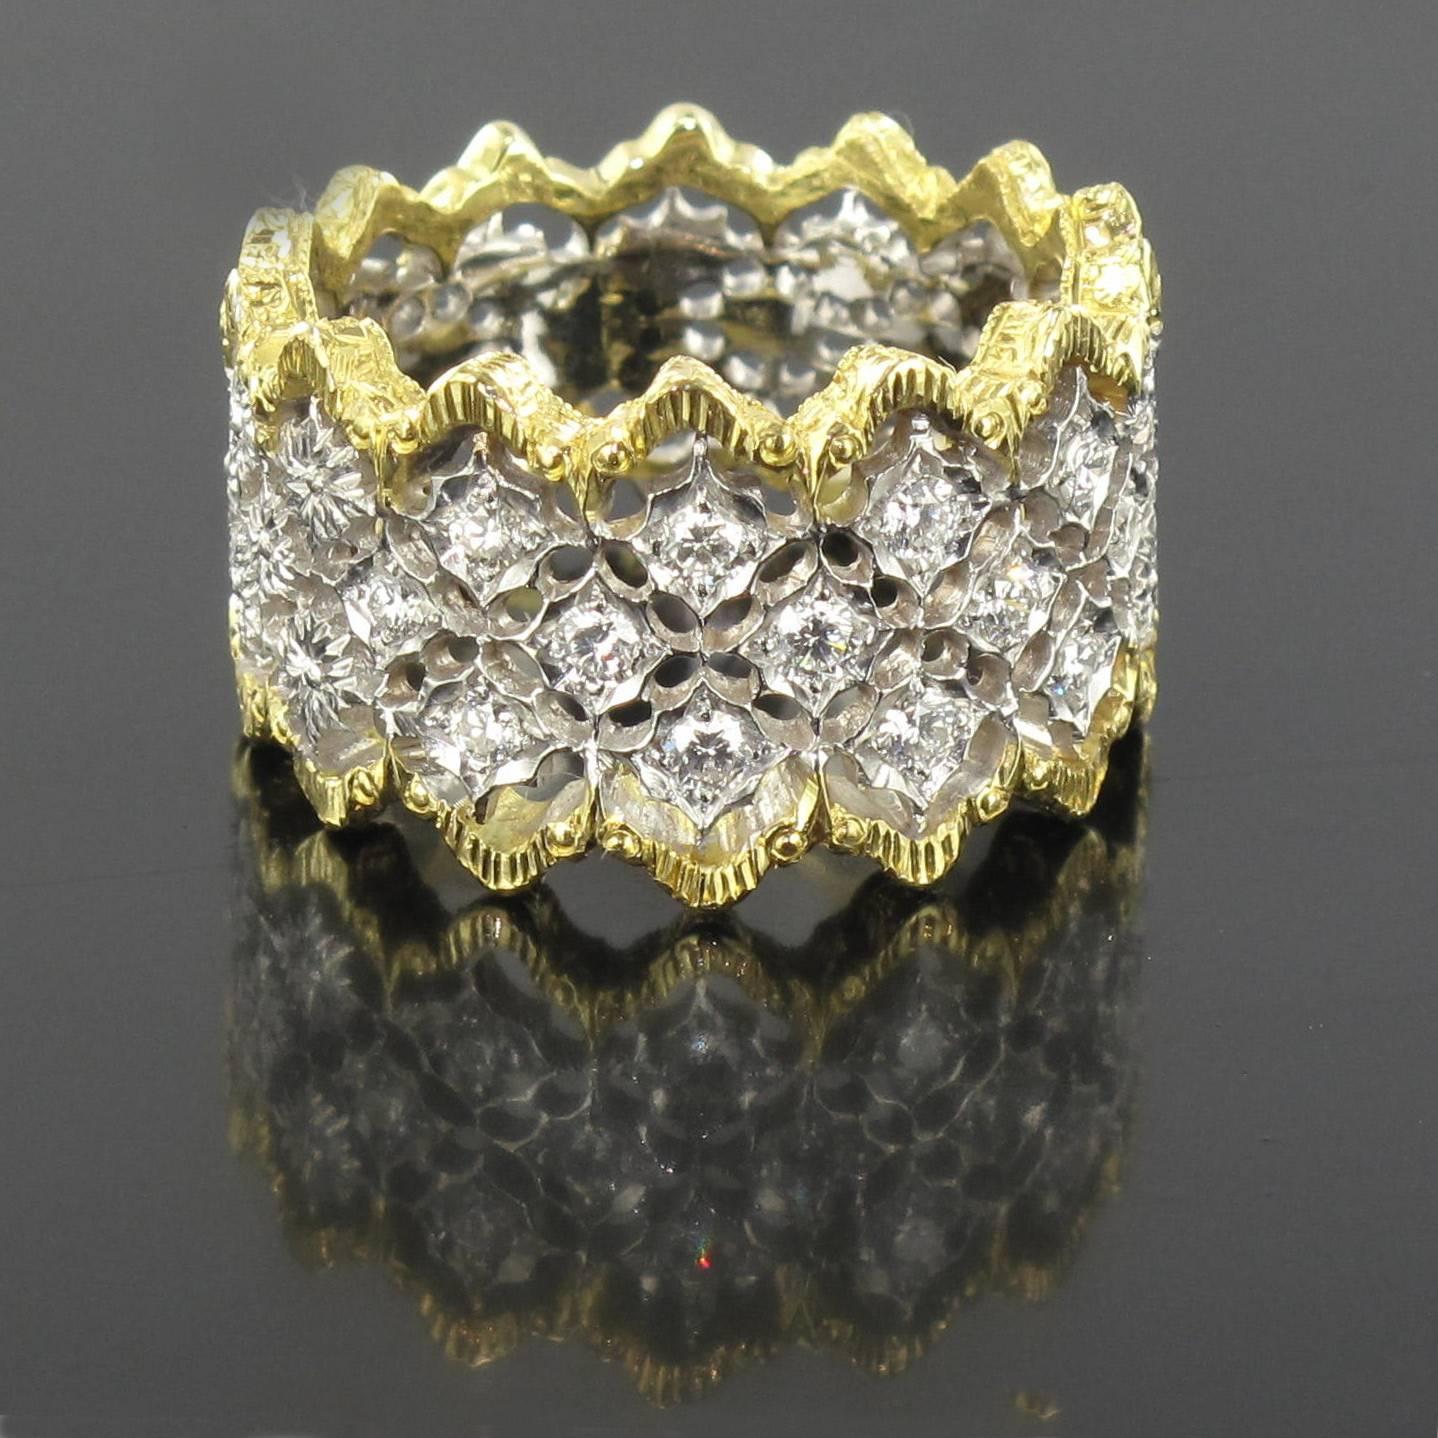 Ring in 18 carat yellow and white gold. 

This wide diamond ring features white gold filigree set with 13 small brilliant cut diamonds edged with yellow gold filigree. 

Total diamond weight: about 0.34 carat.
Width: 1.3 cm
Total weight: about